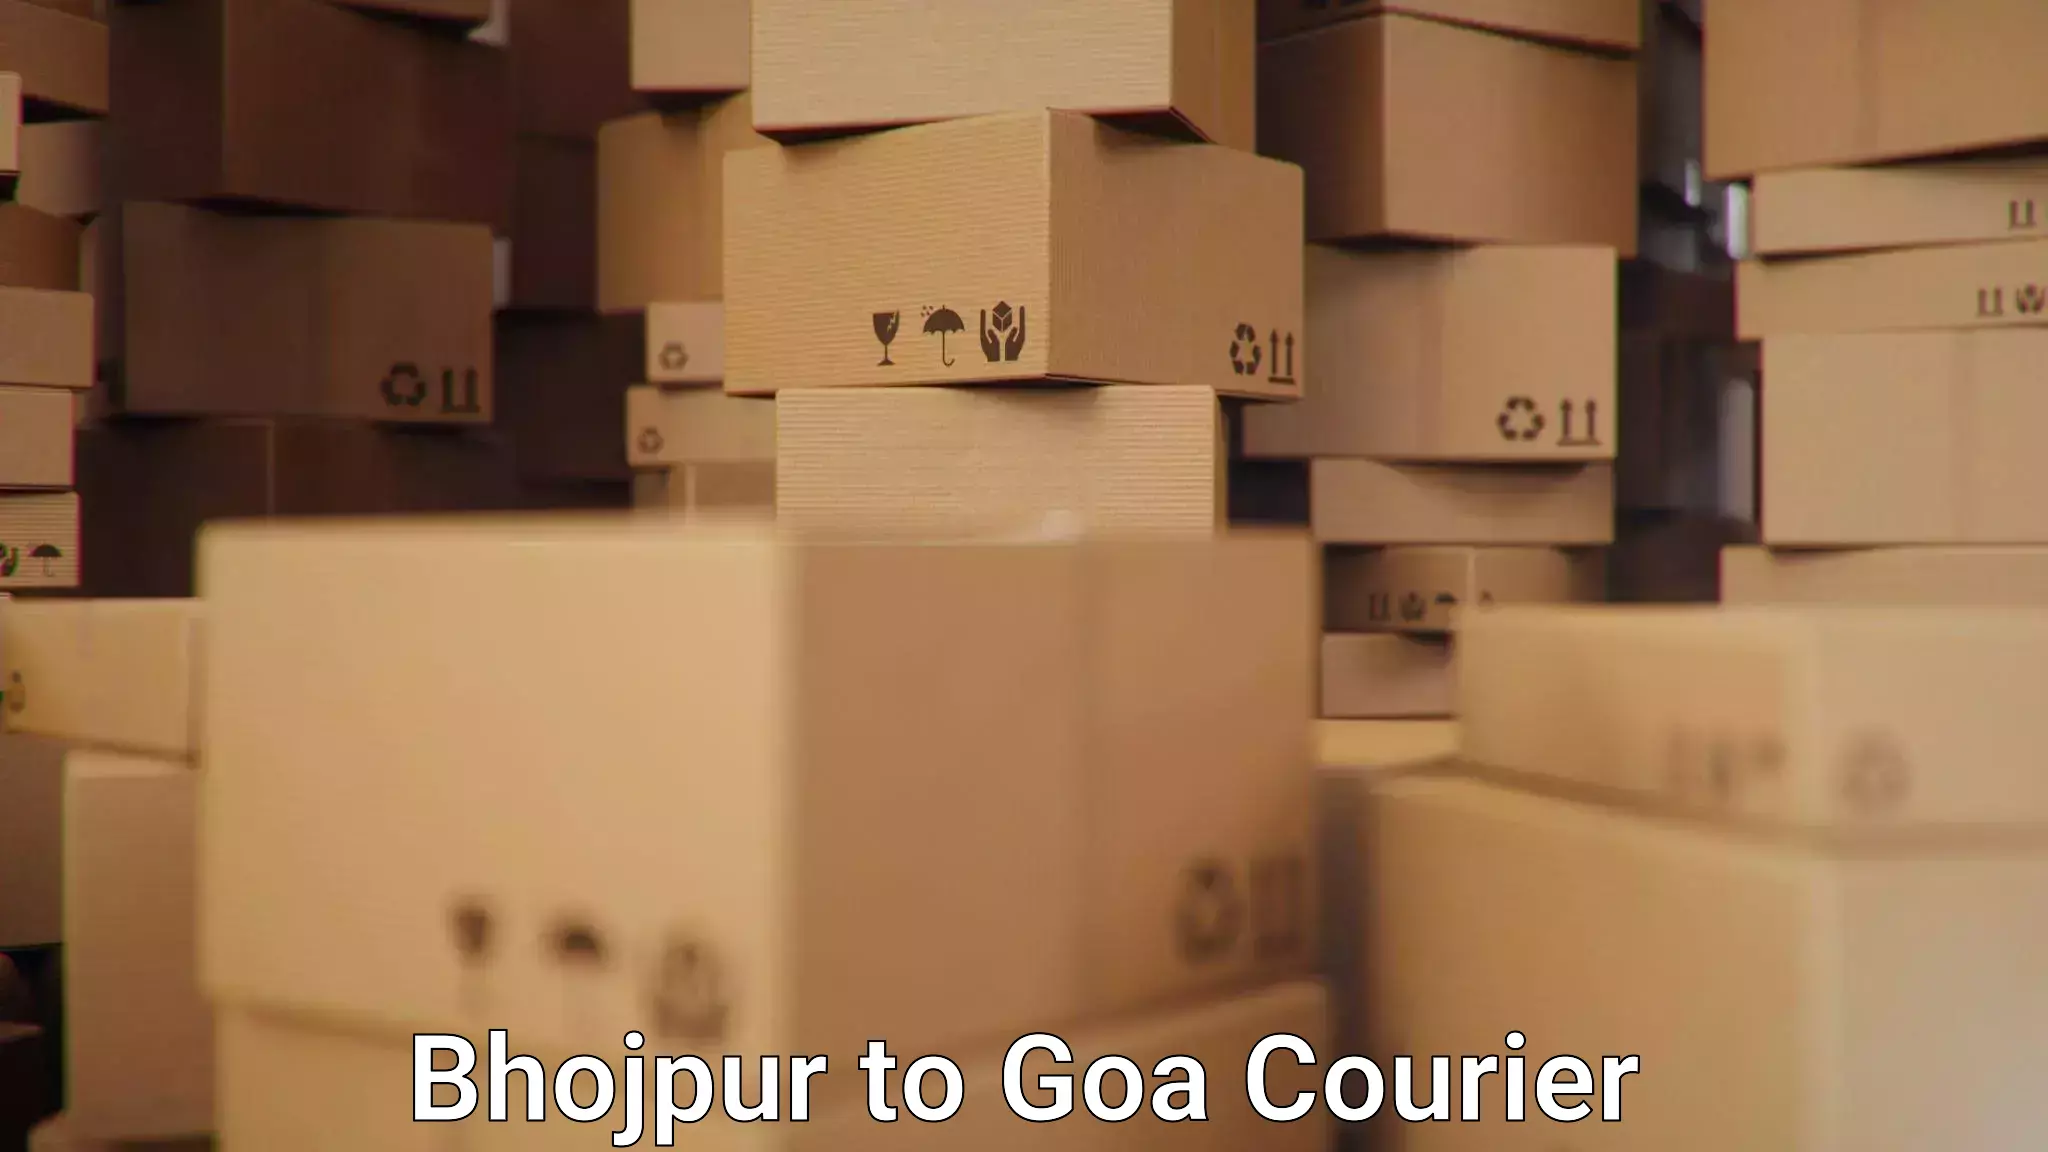 Efficient shipping operations Bhojpur to Goa University